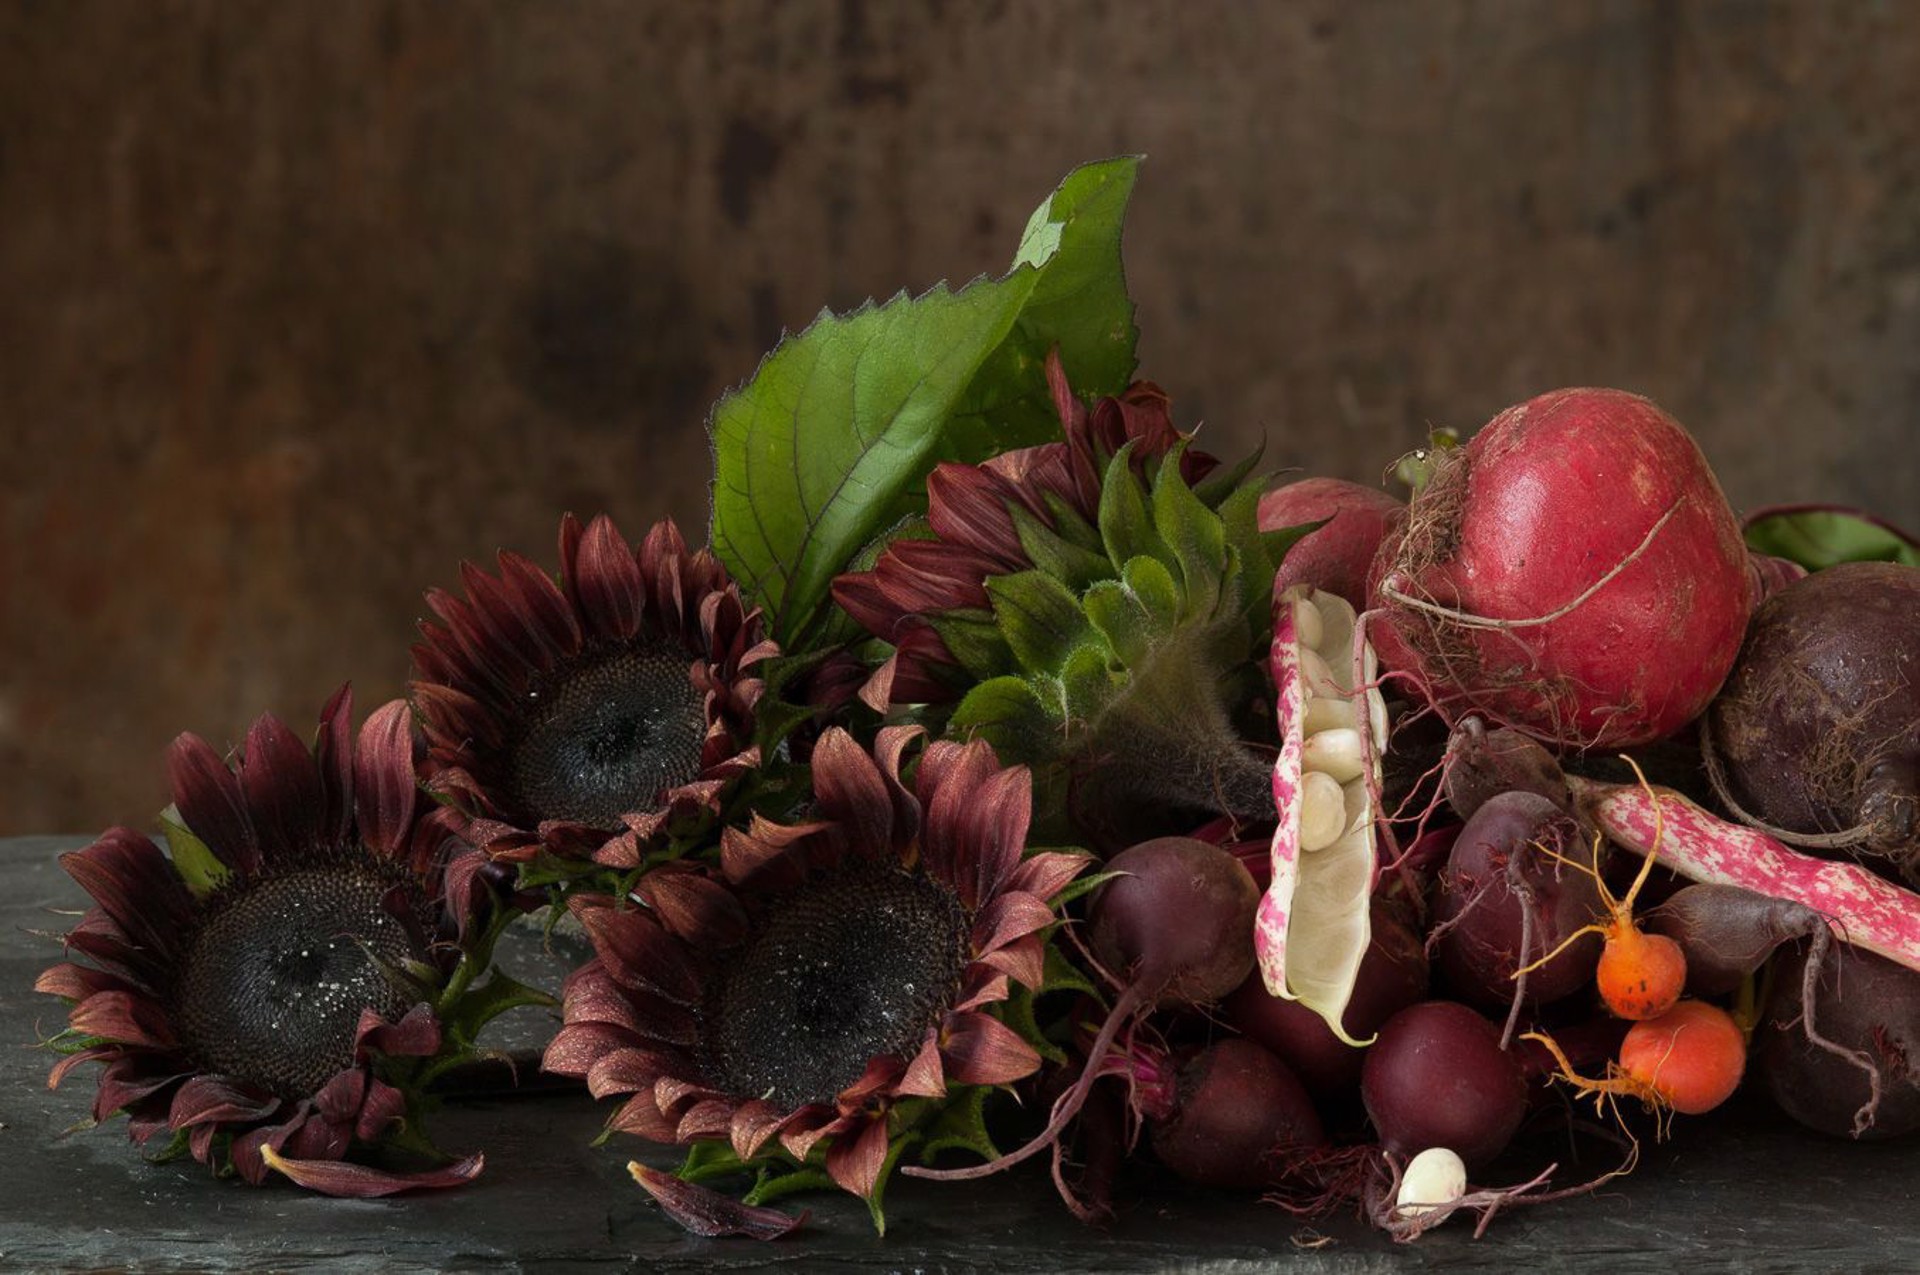 Sunflowers, Beets and Bean Still Life by Lynn Karlin